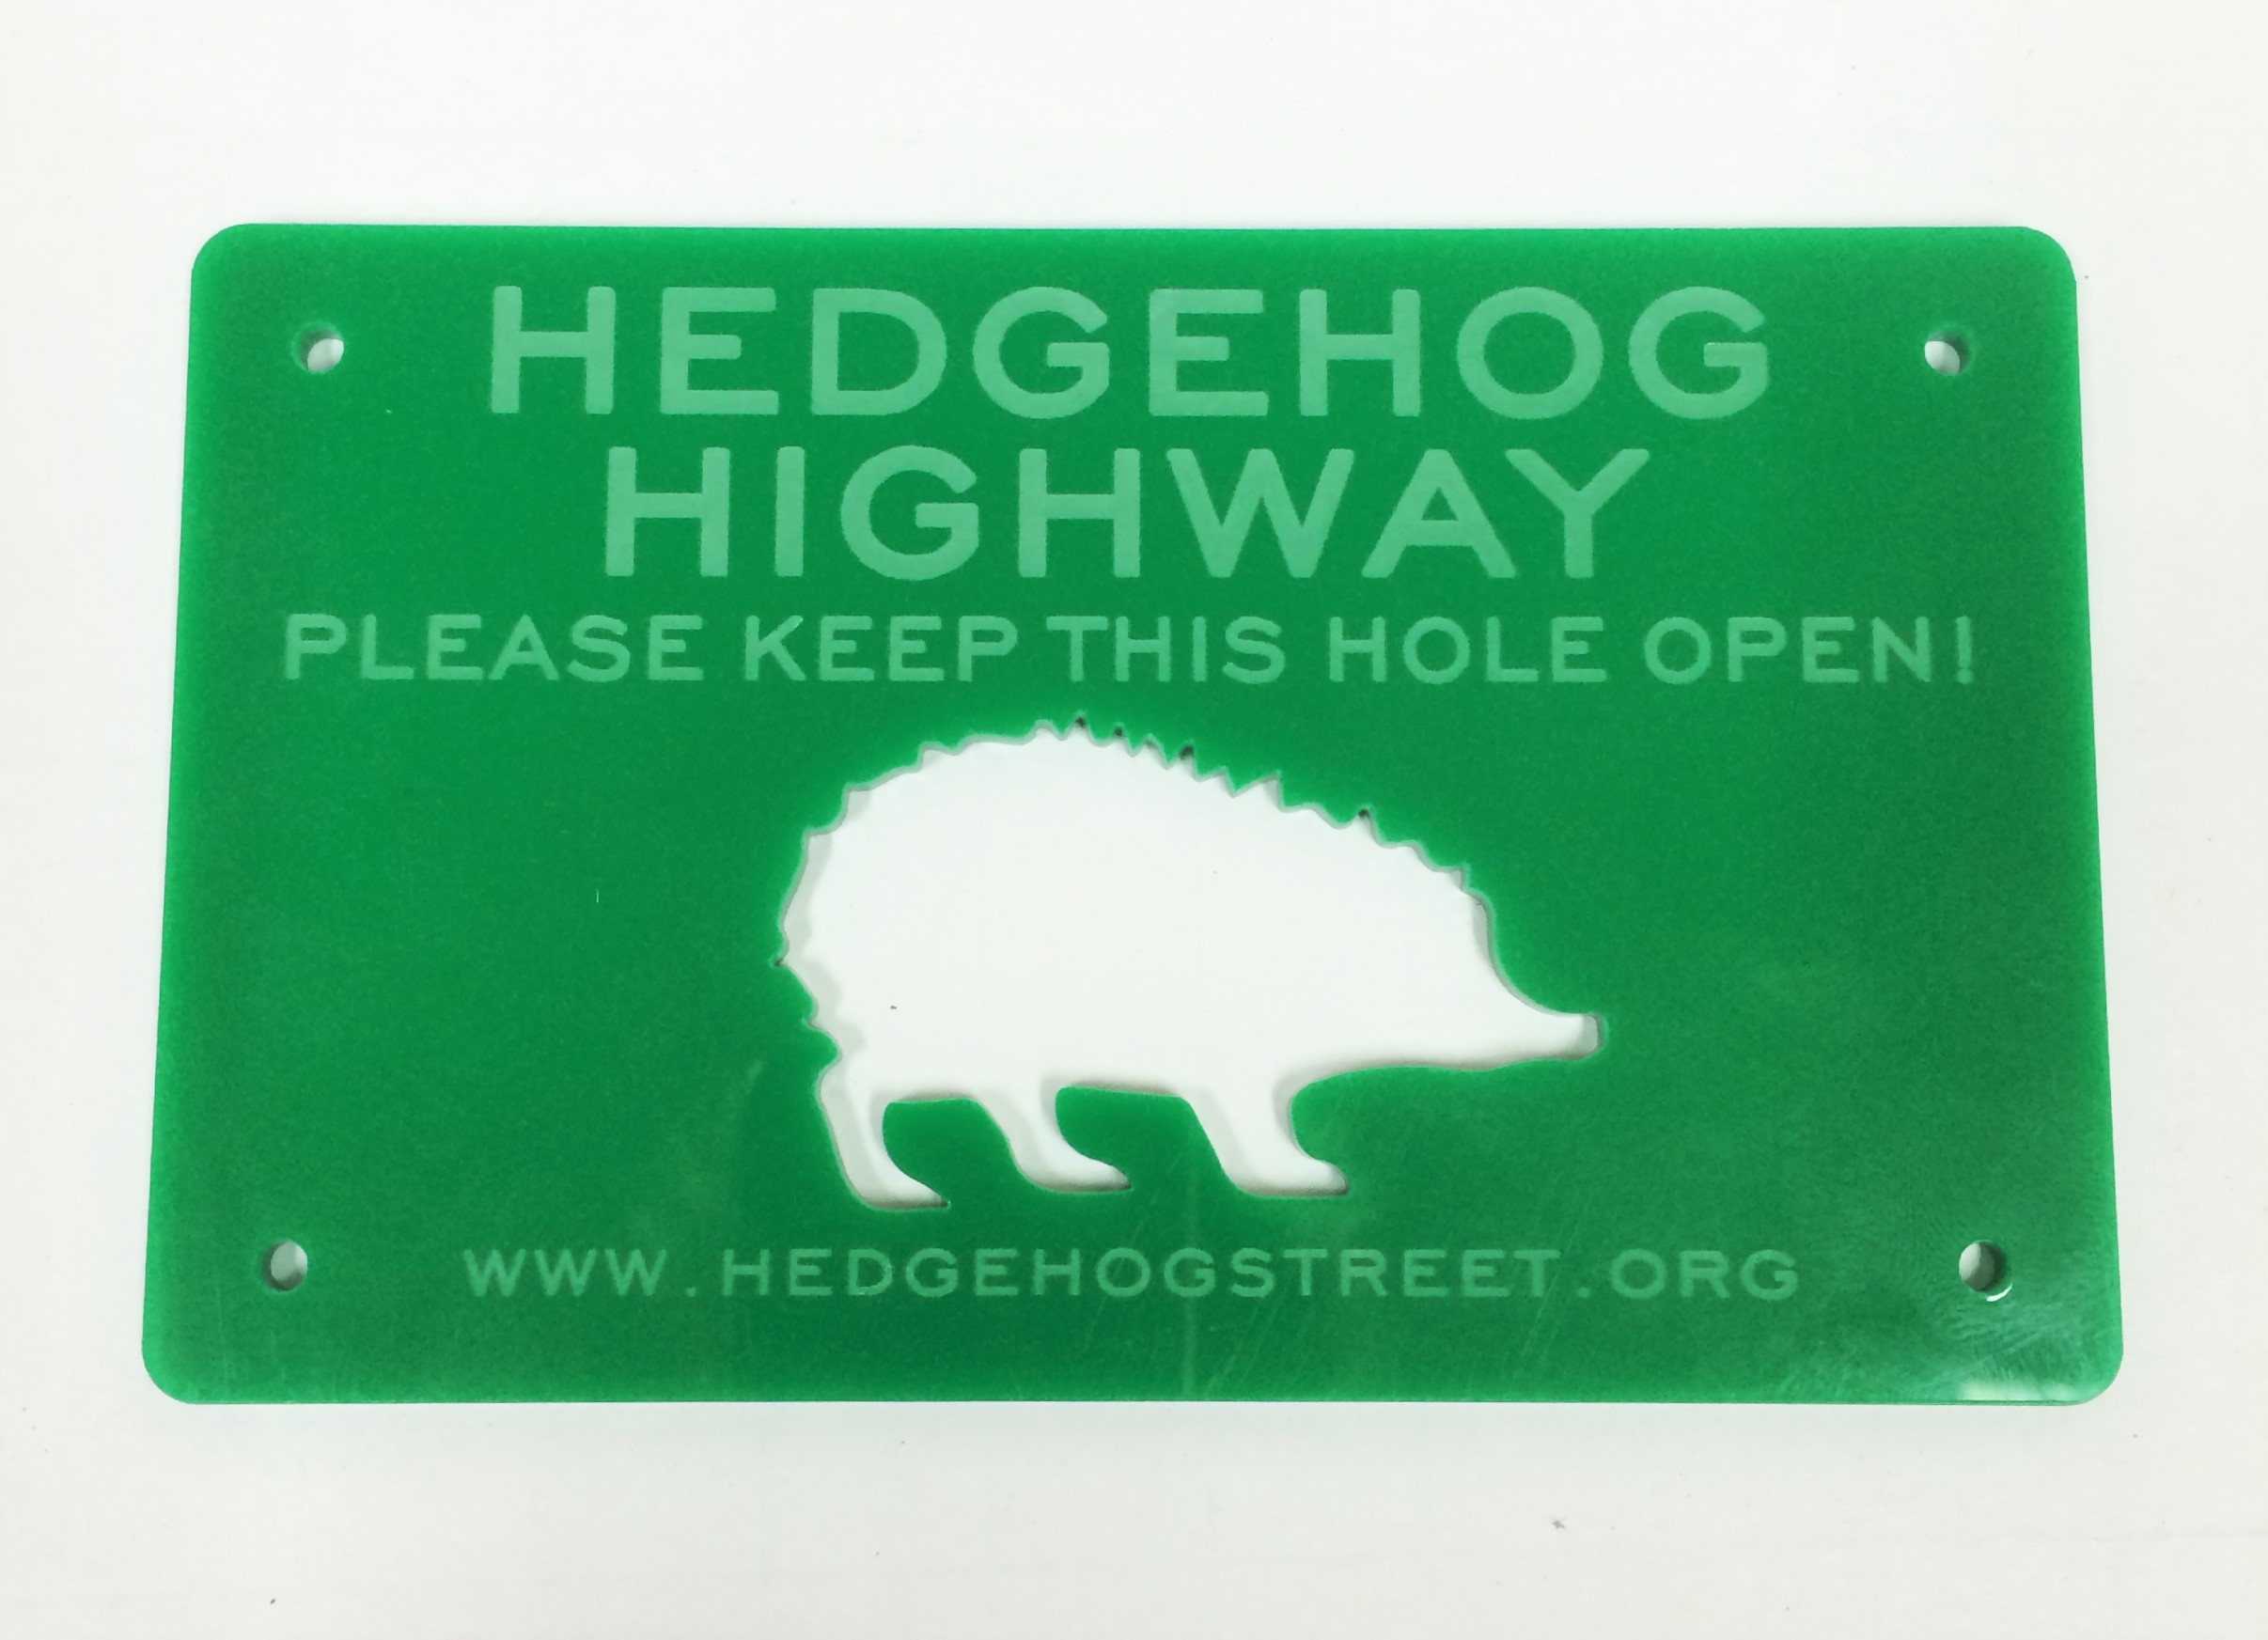 Lazer cut from recycled plastic, use this sign to label your hedgehog highway for posterity